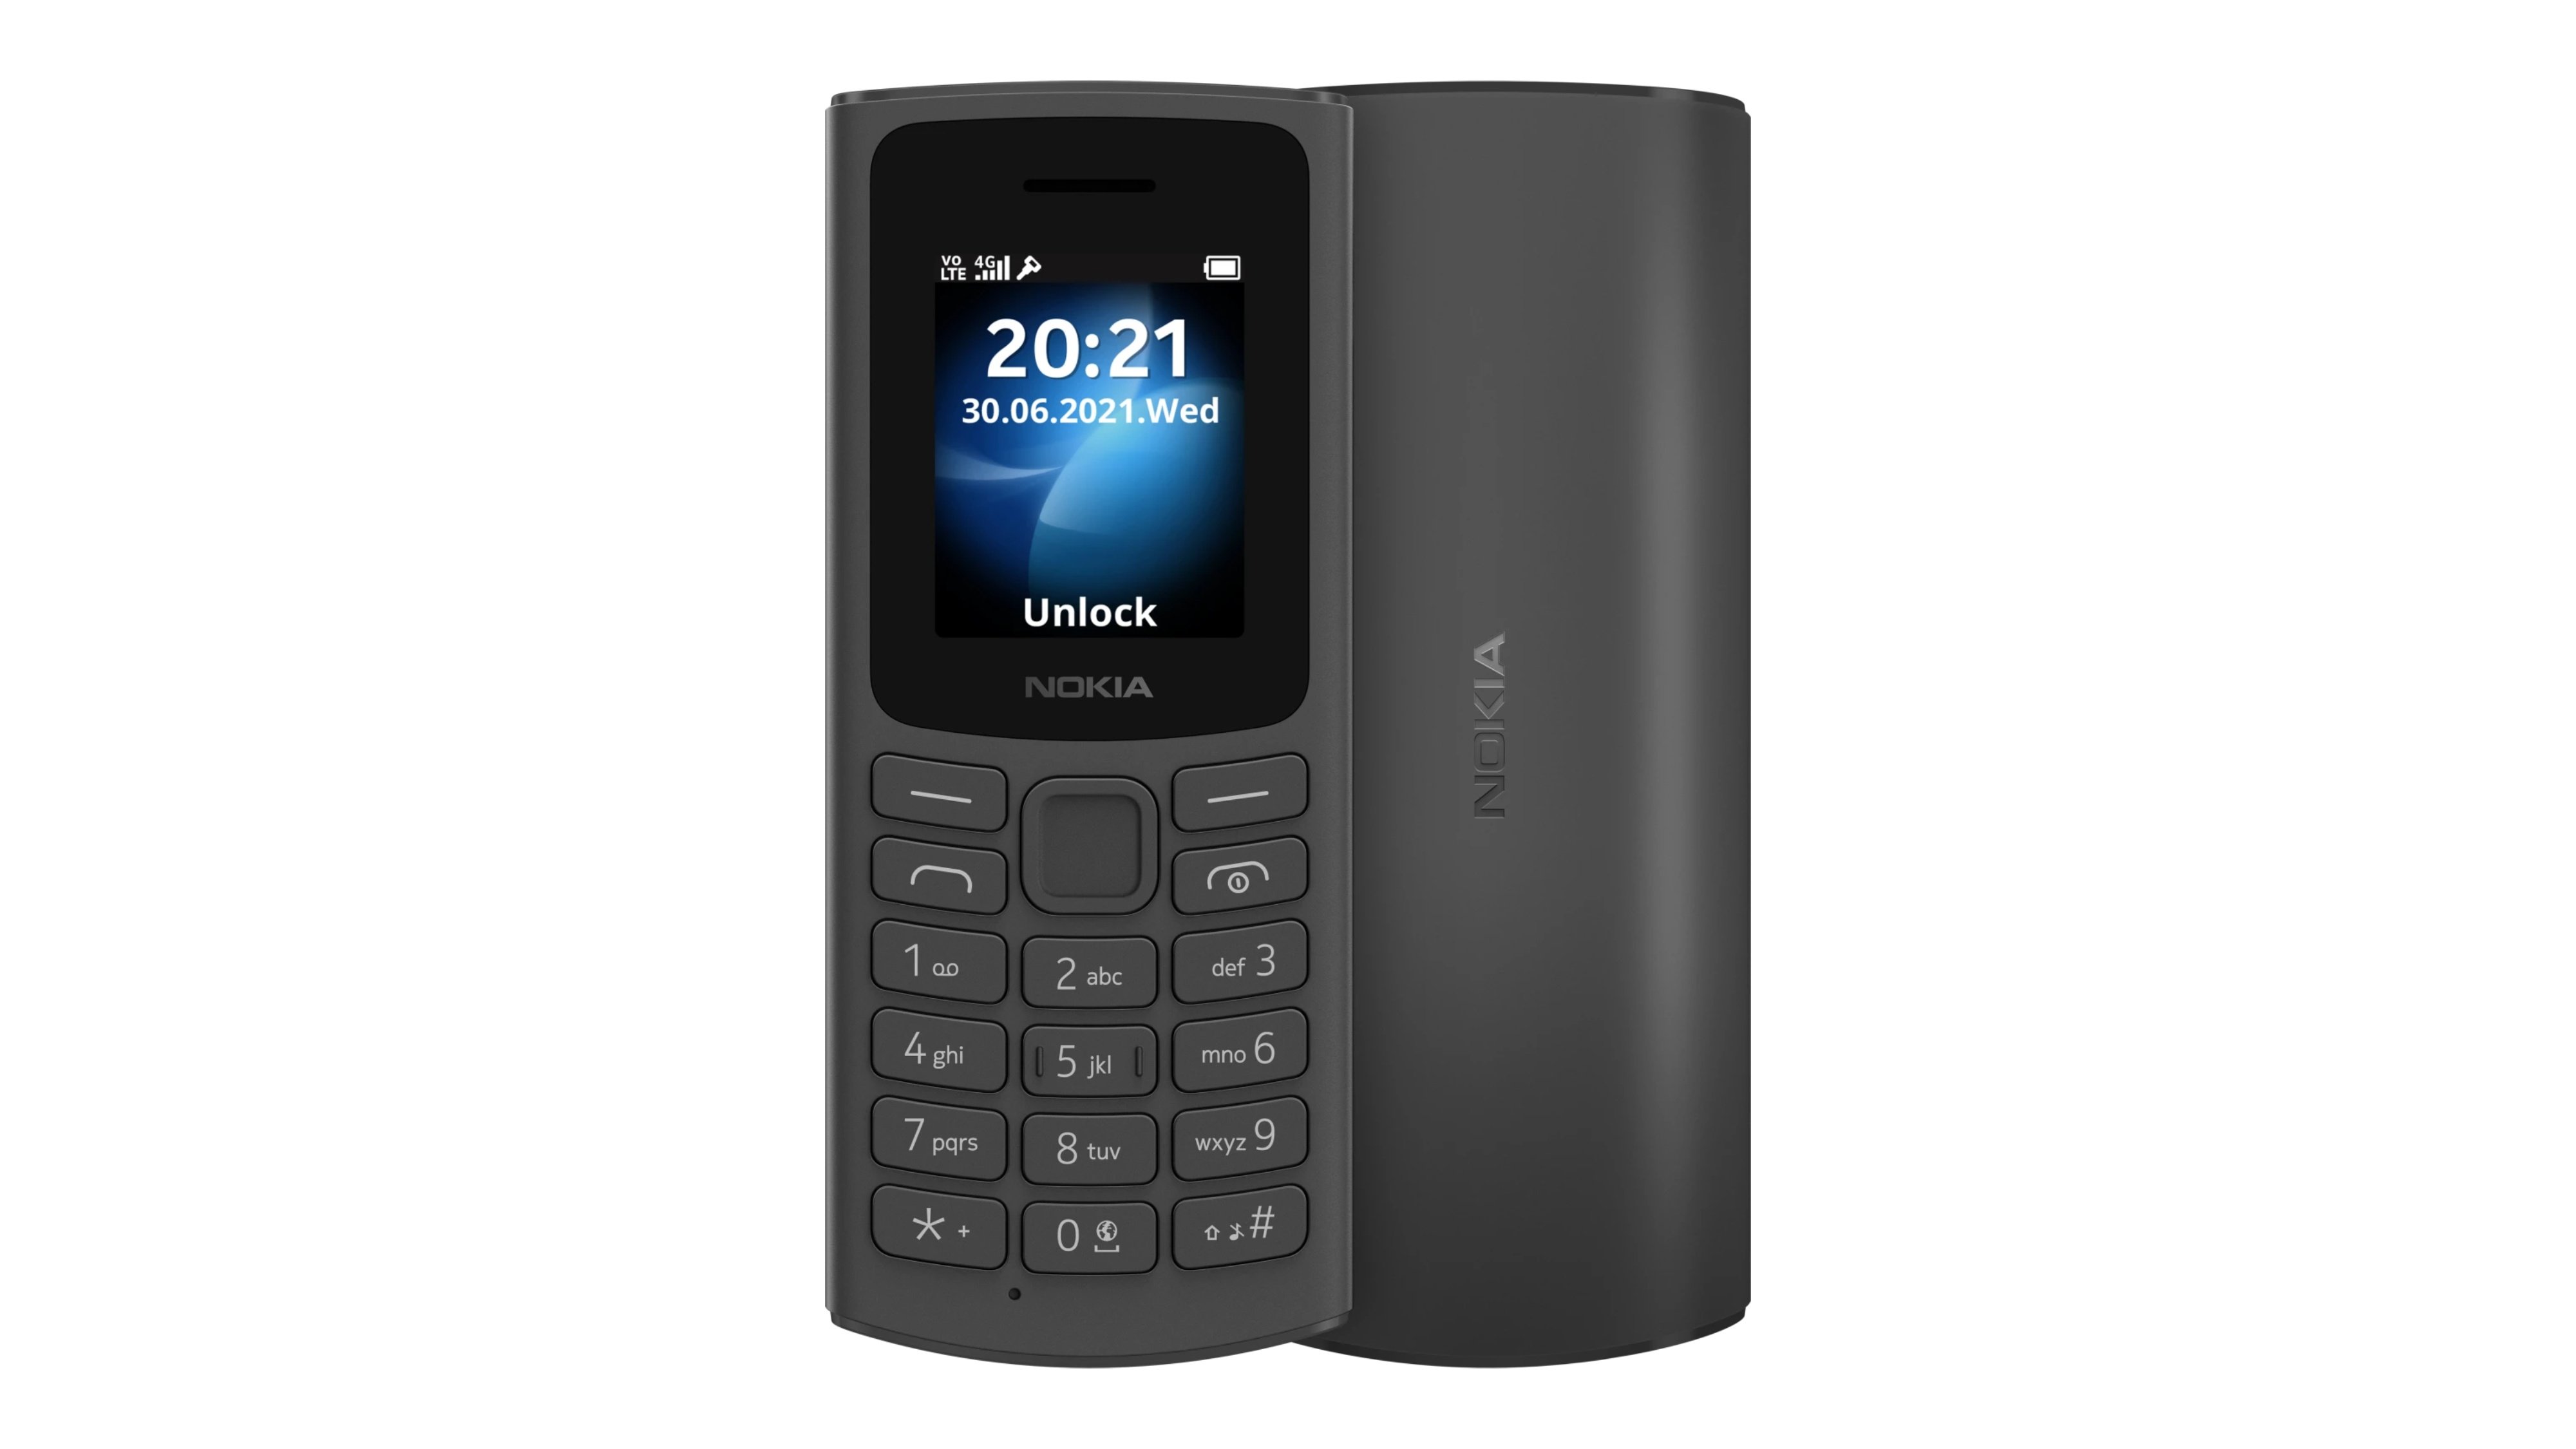 Nokia 105 4g With Alipay Support Launched In China For Only 229 36 Gizmochina